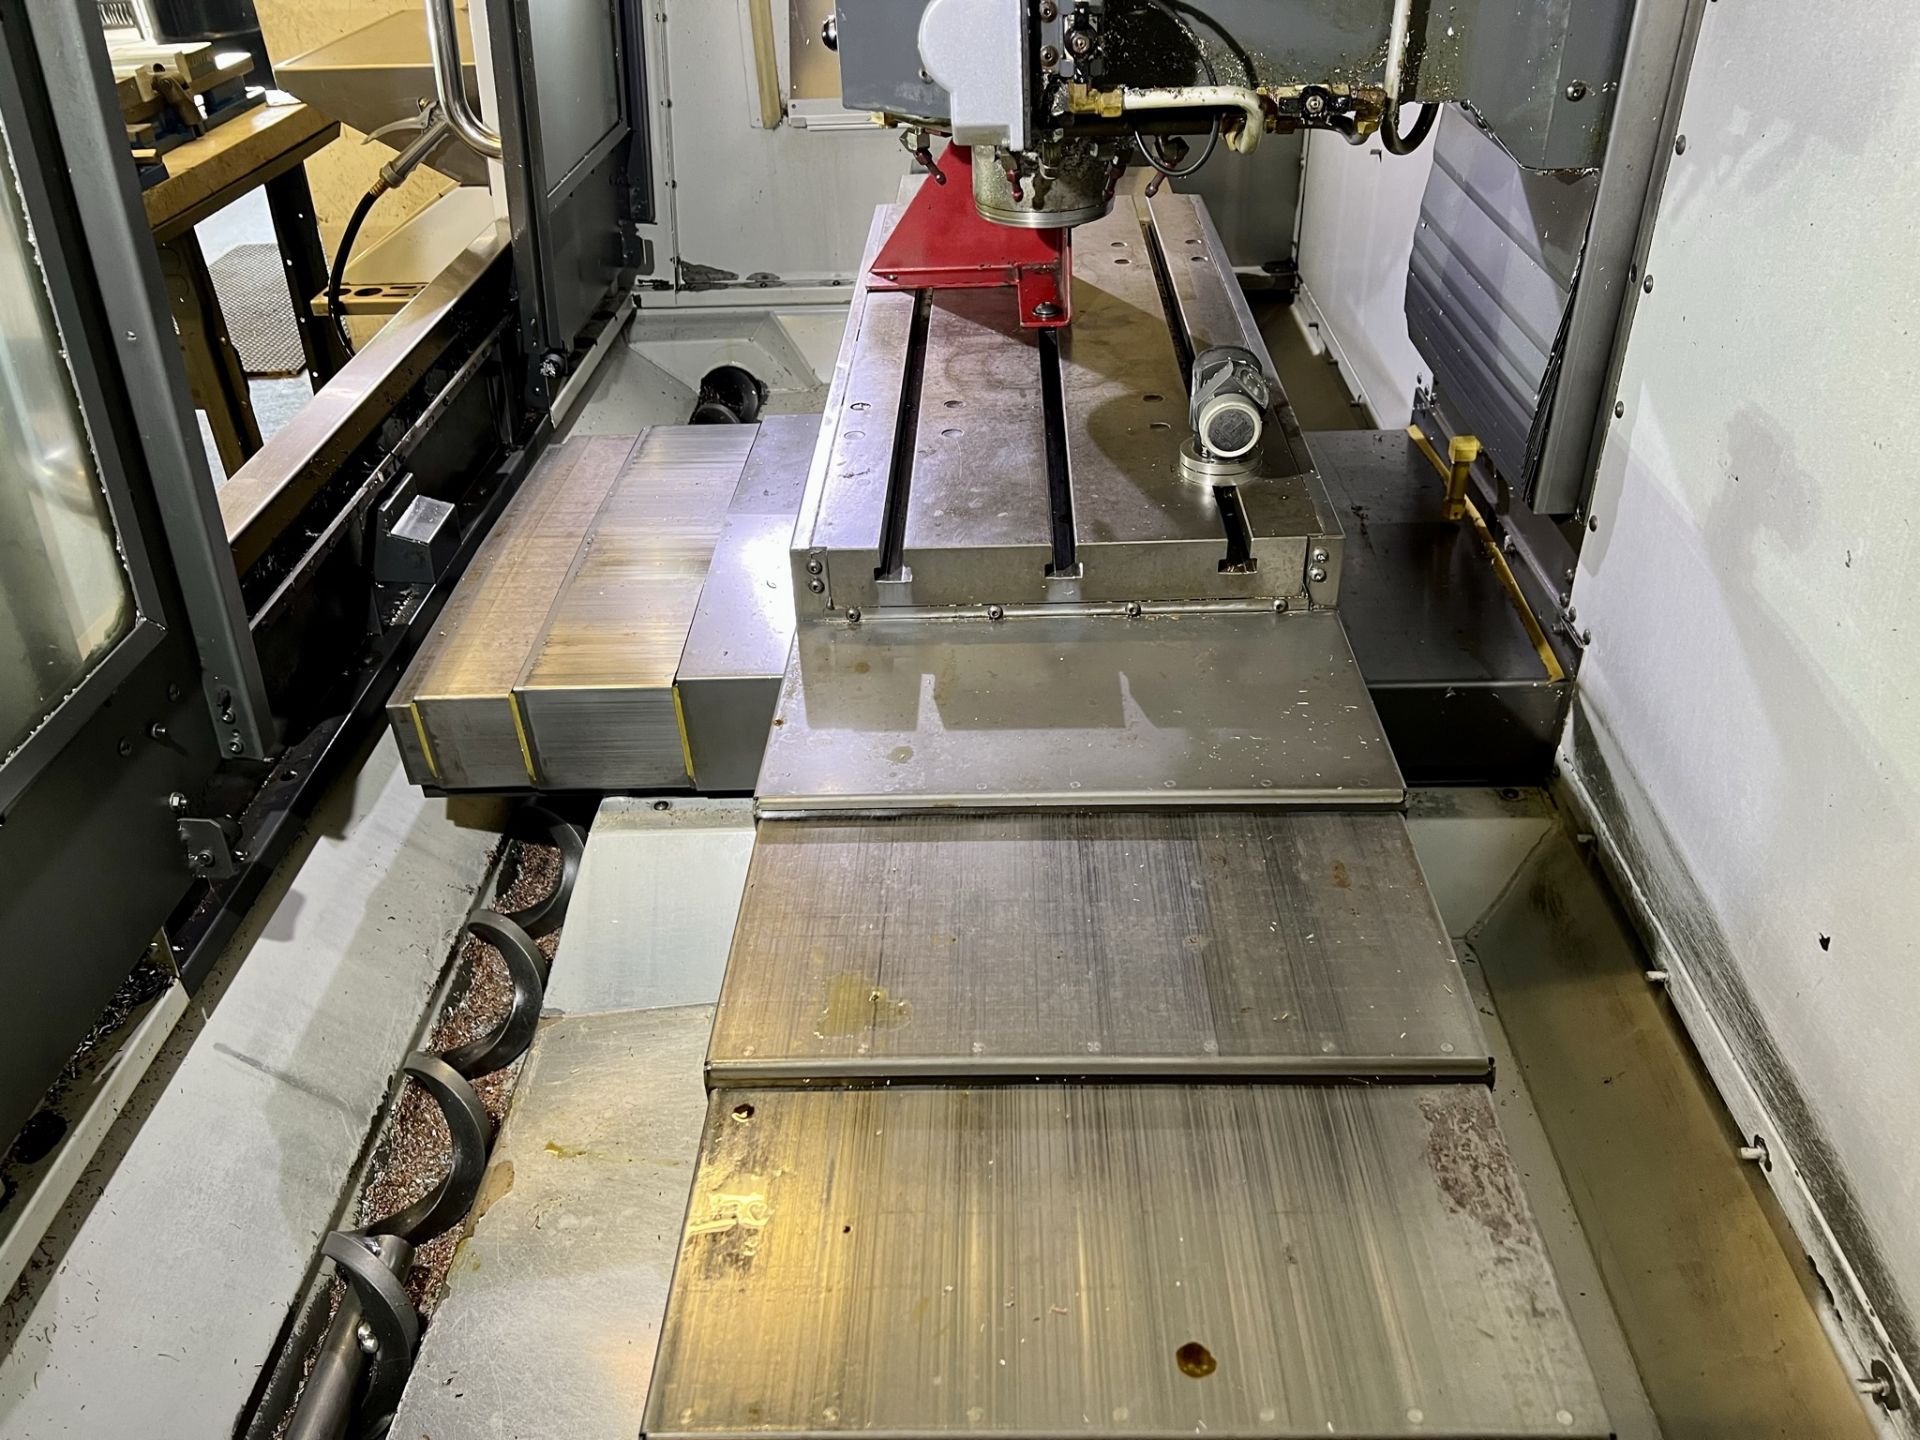 2015 HAAS VF-2 VERTICAL MACHINING CENTER, XYZ TRAVELS: 30" X 16" X 20", 36" X 14" TABLE, PROBING - Image 16 of 24